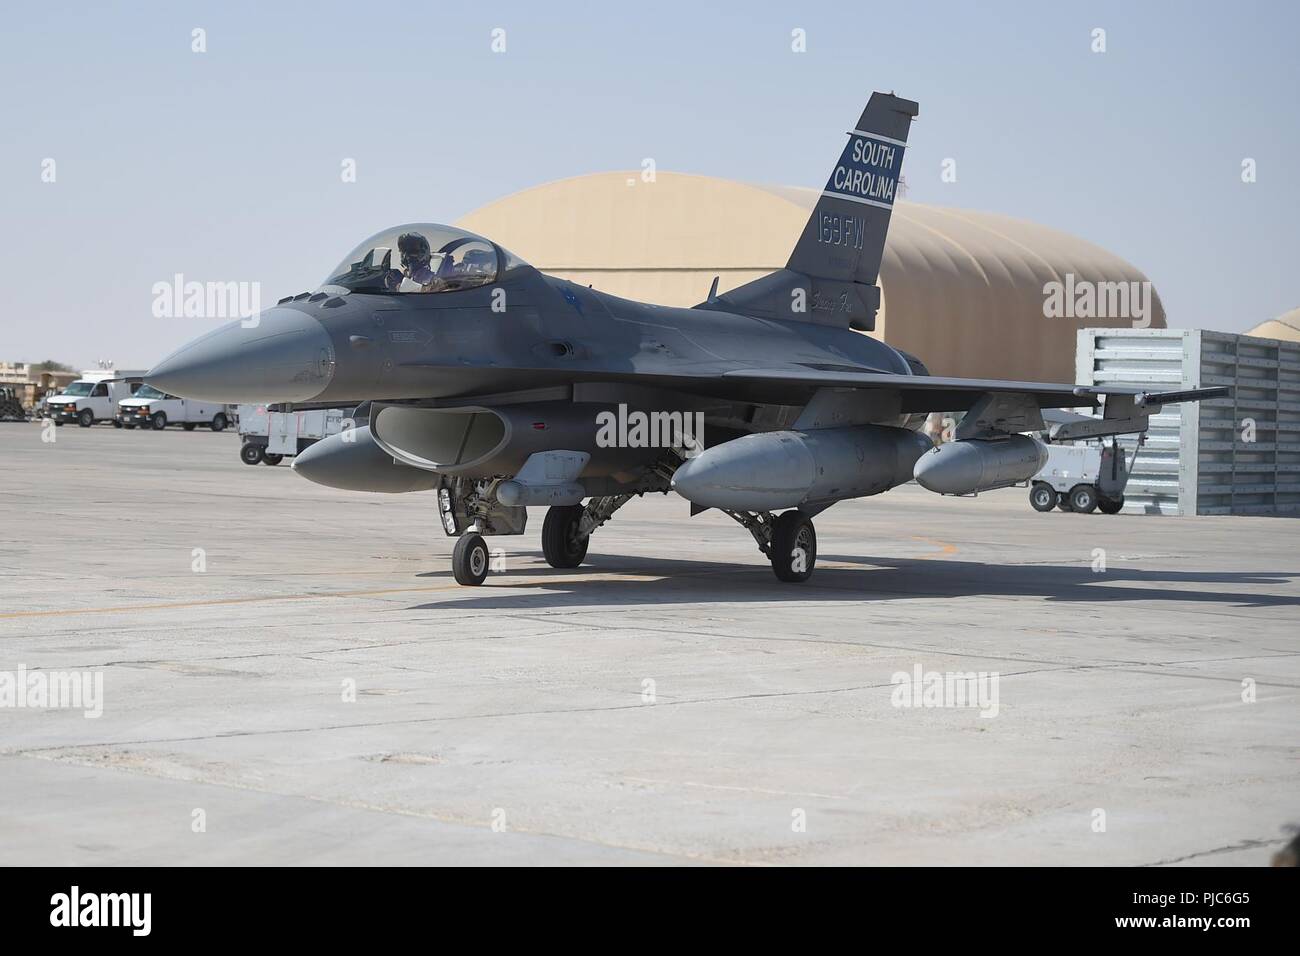 A pilot from the 157th Expeditionary Fighter Squadron prepares to park an F-16 Fighting Falcon, July 16, 2018, at an undisclosed location in Southwest Asia. More than 300 Airmen from the 169th Fighter Wing of the South Carolina Air National Guard recently deployed to the 407th Air Expeditionary Group in support of Operation Inherent Resolve. Stock Photo